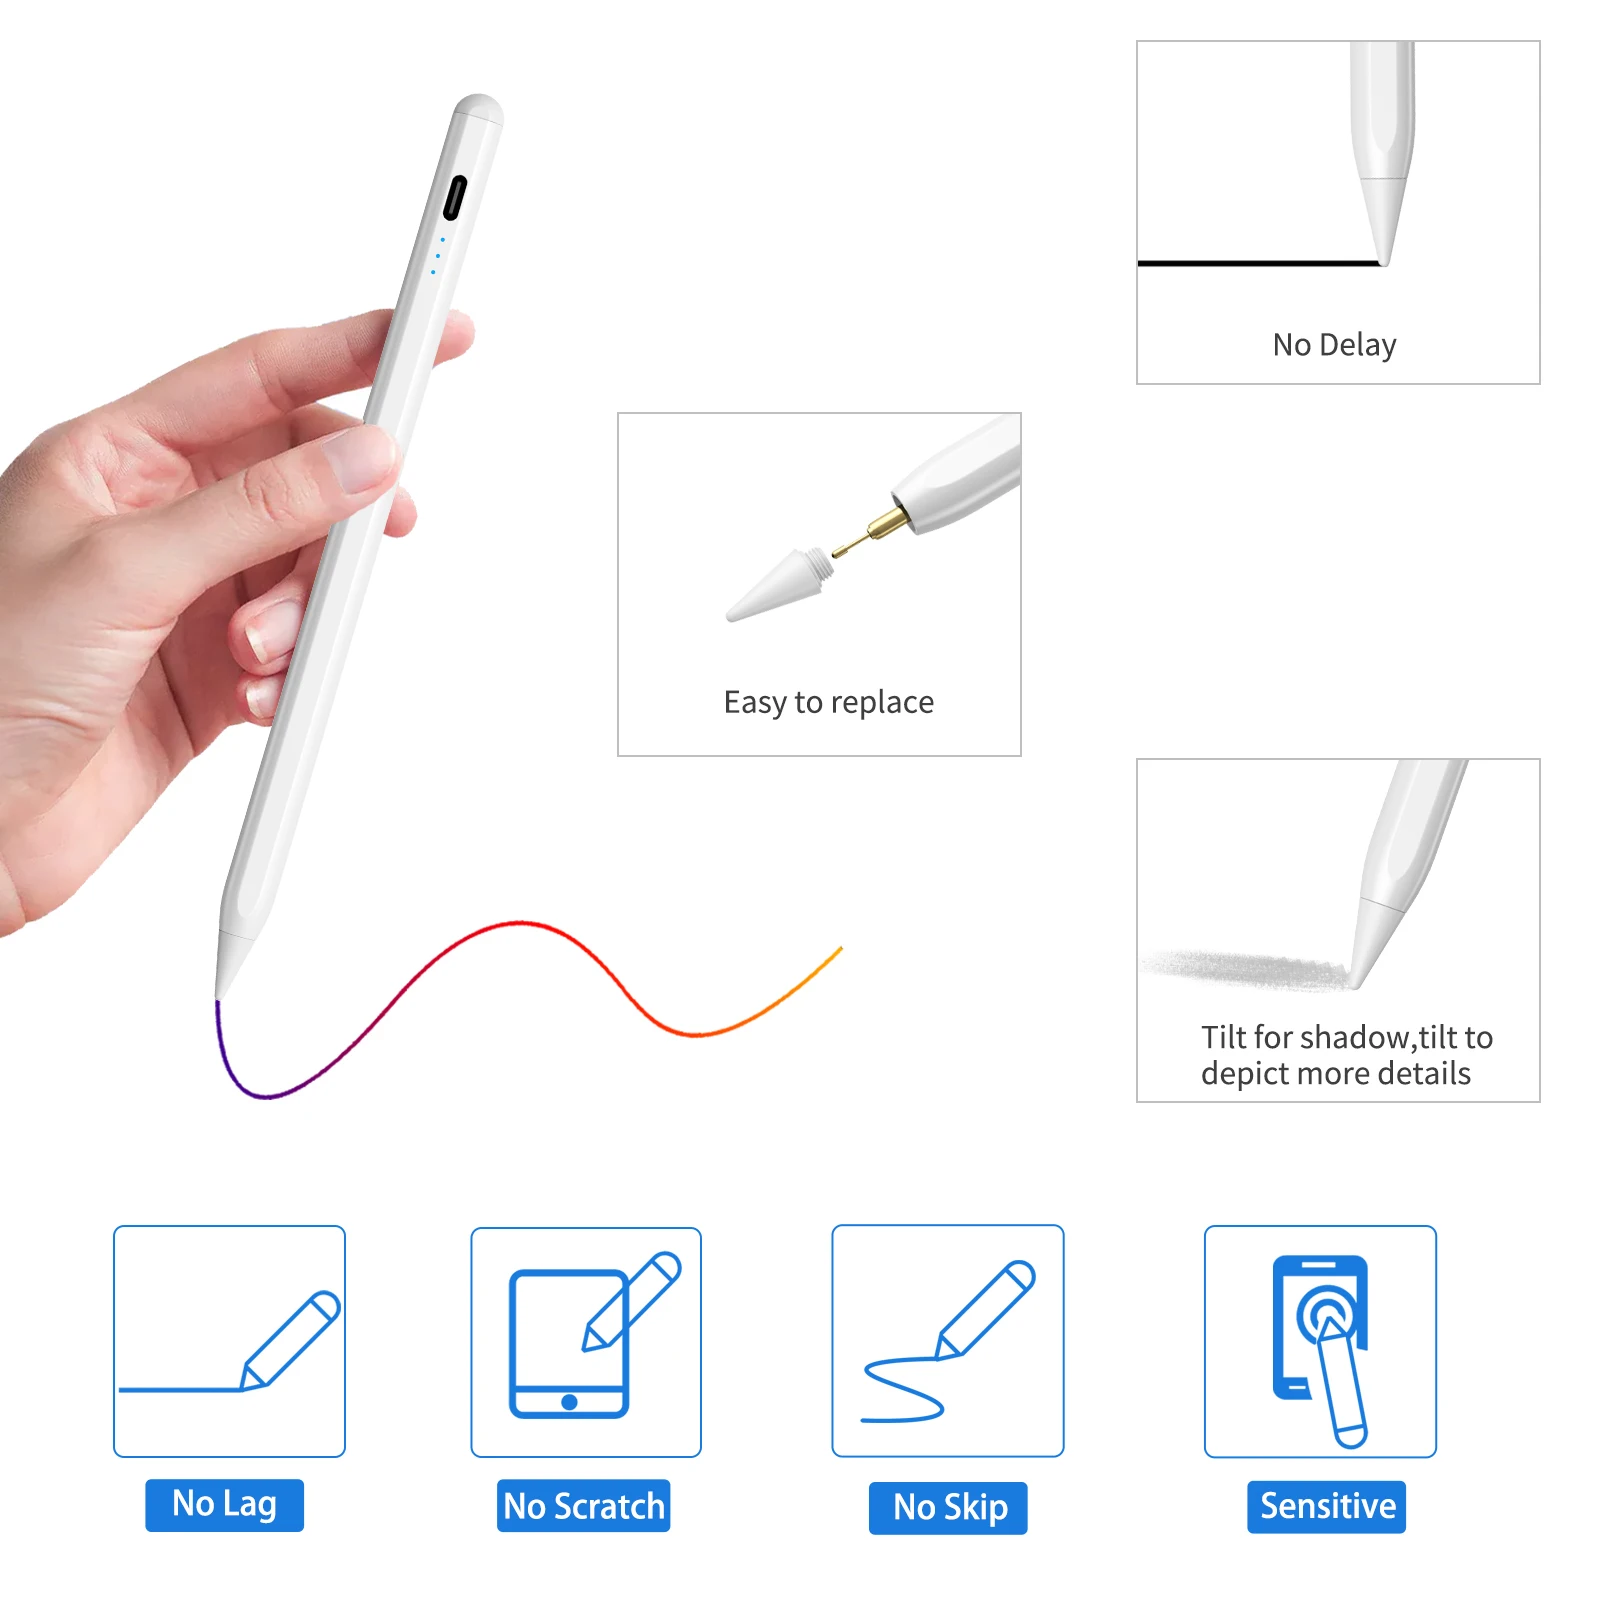 Newest Palm Rejection Touch Screen Stylus Pen for Apple ipad Pencil Digital Active Stylus Pen with Real-time Power Display